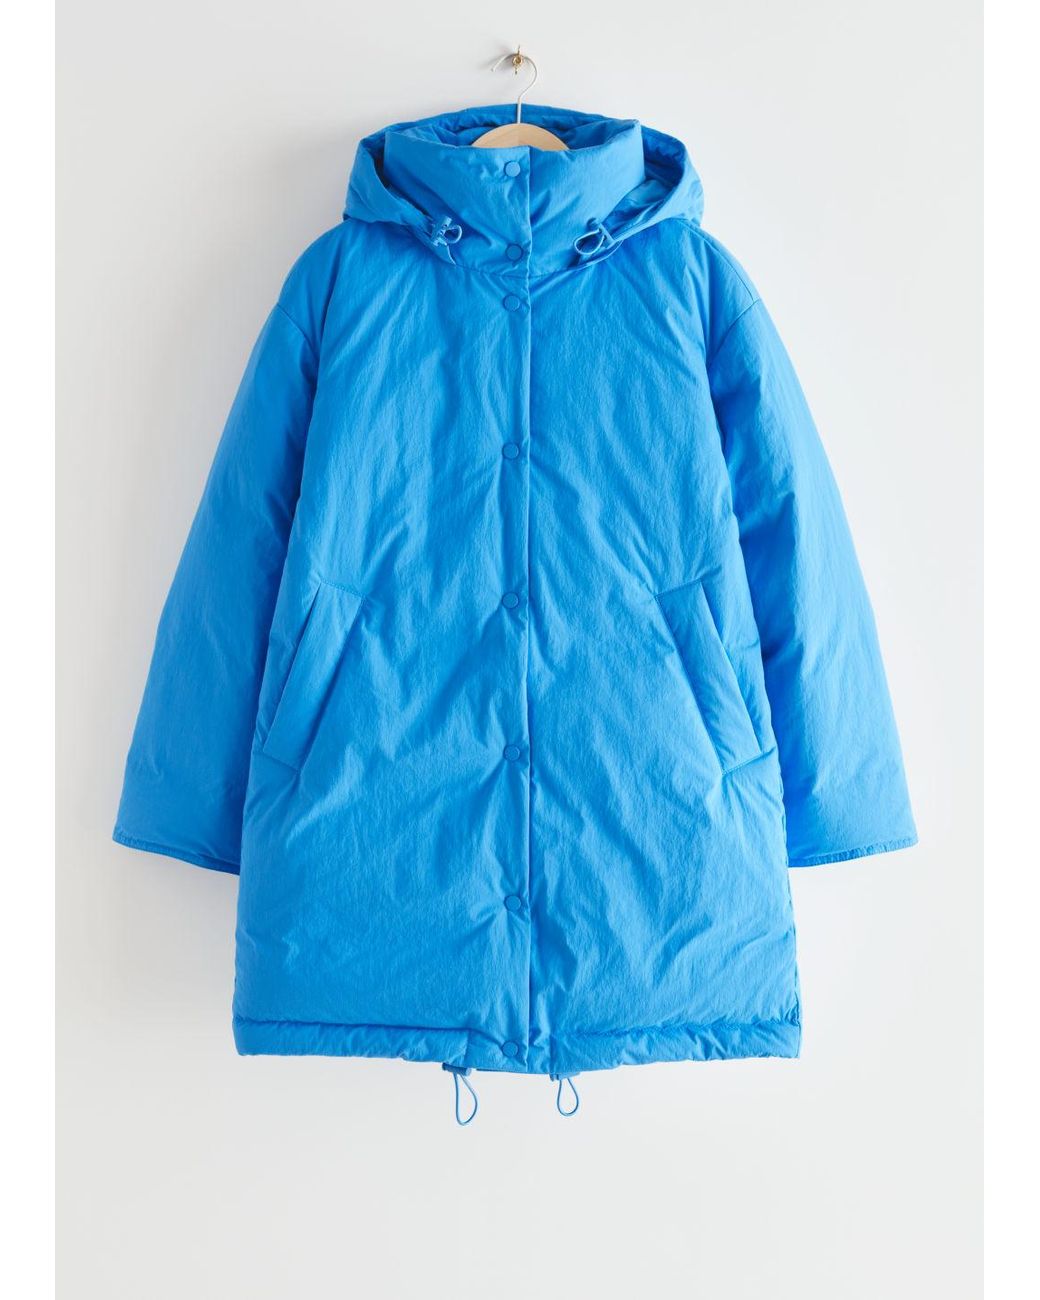 & Other Stories Hooded Down Puffer Jacket in Blue | Lyst